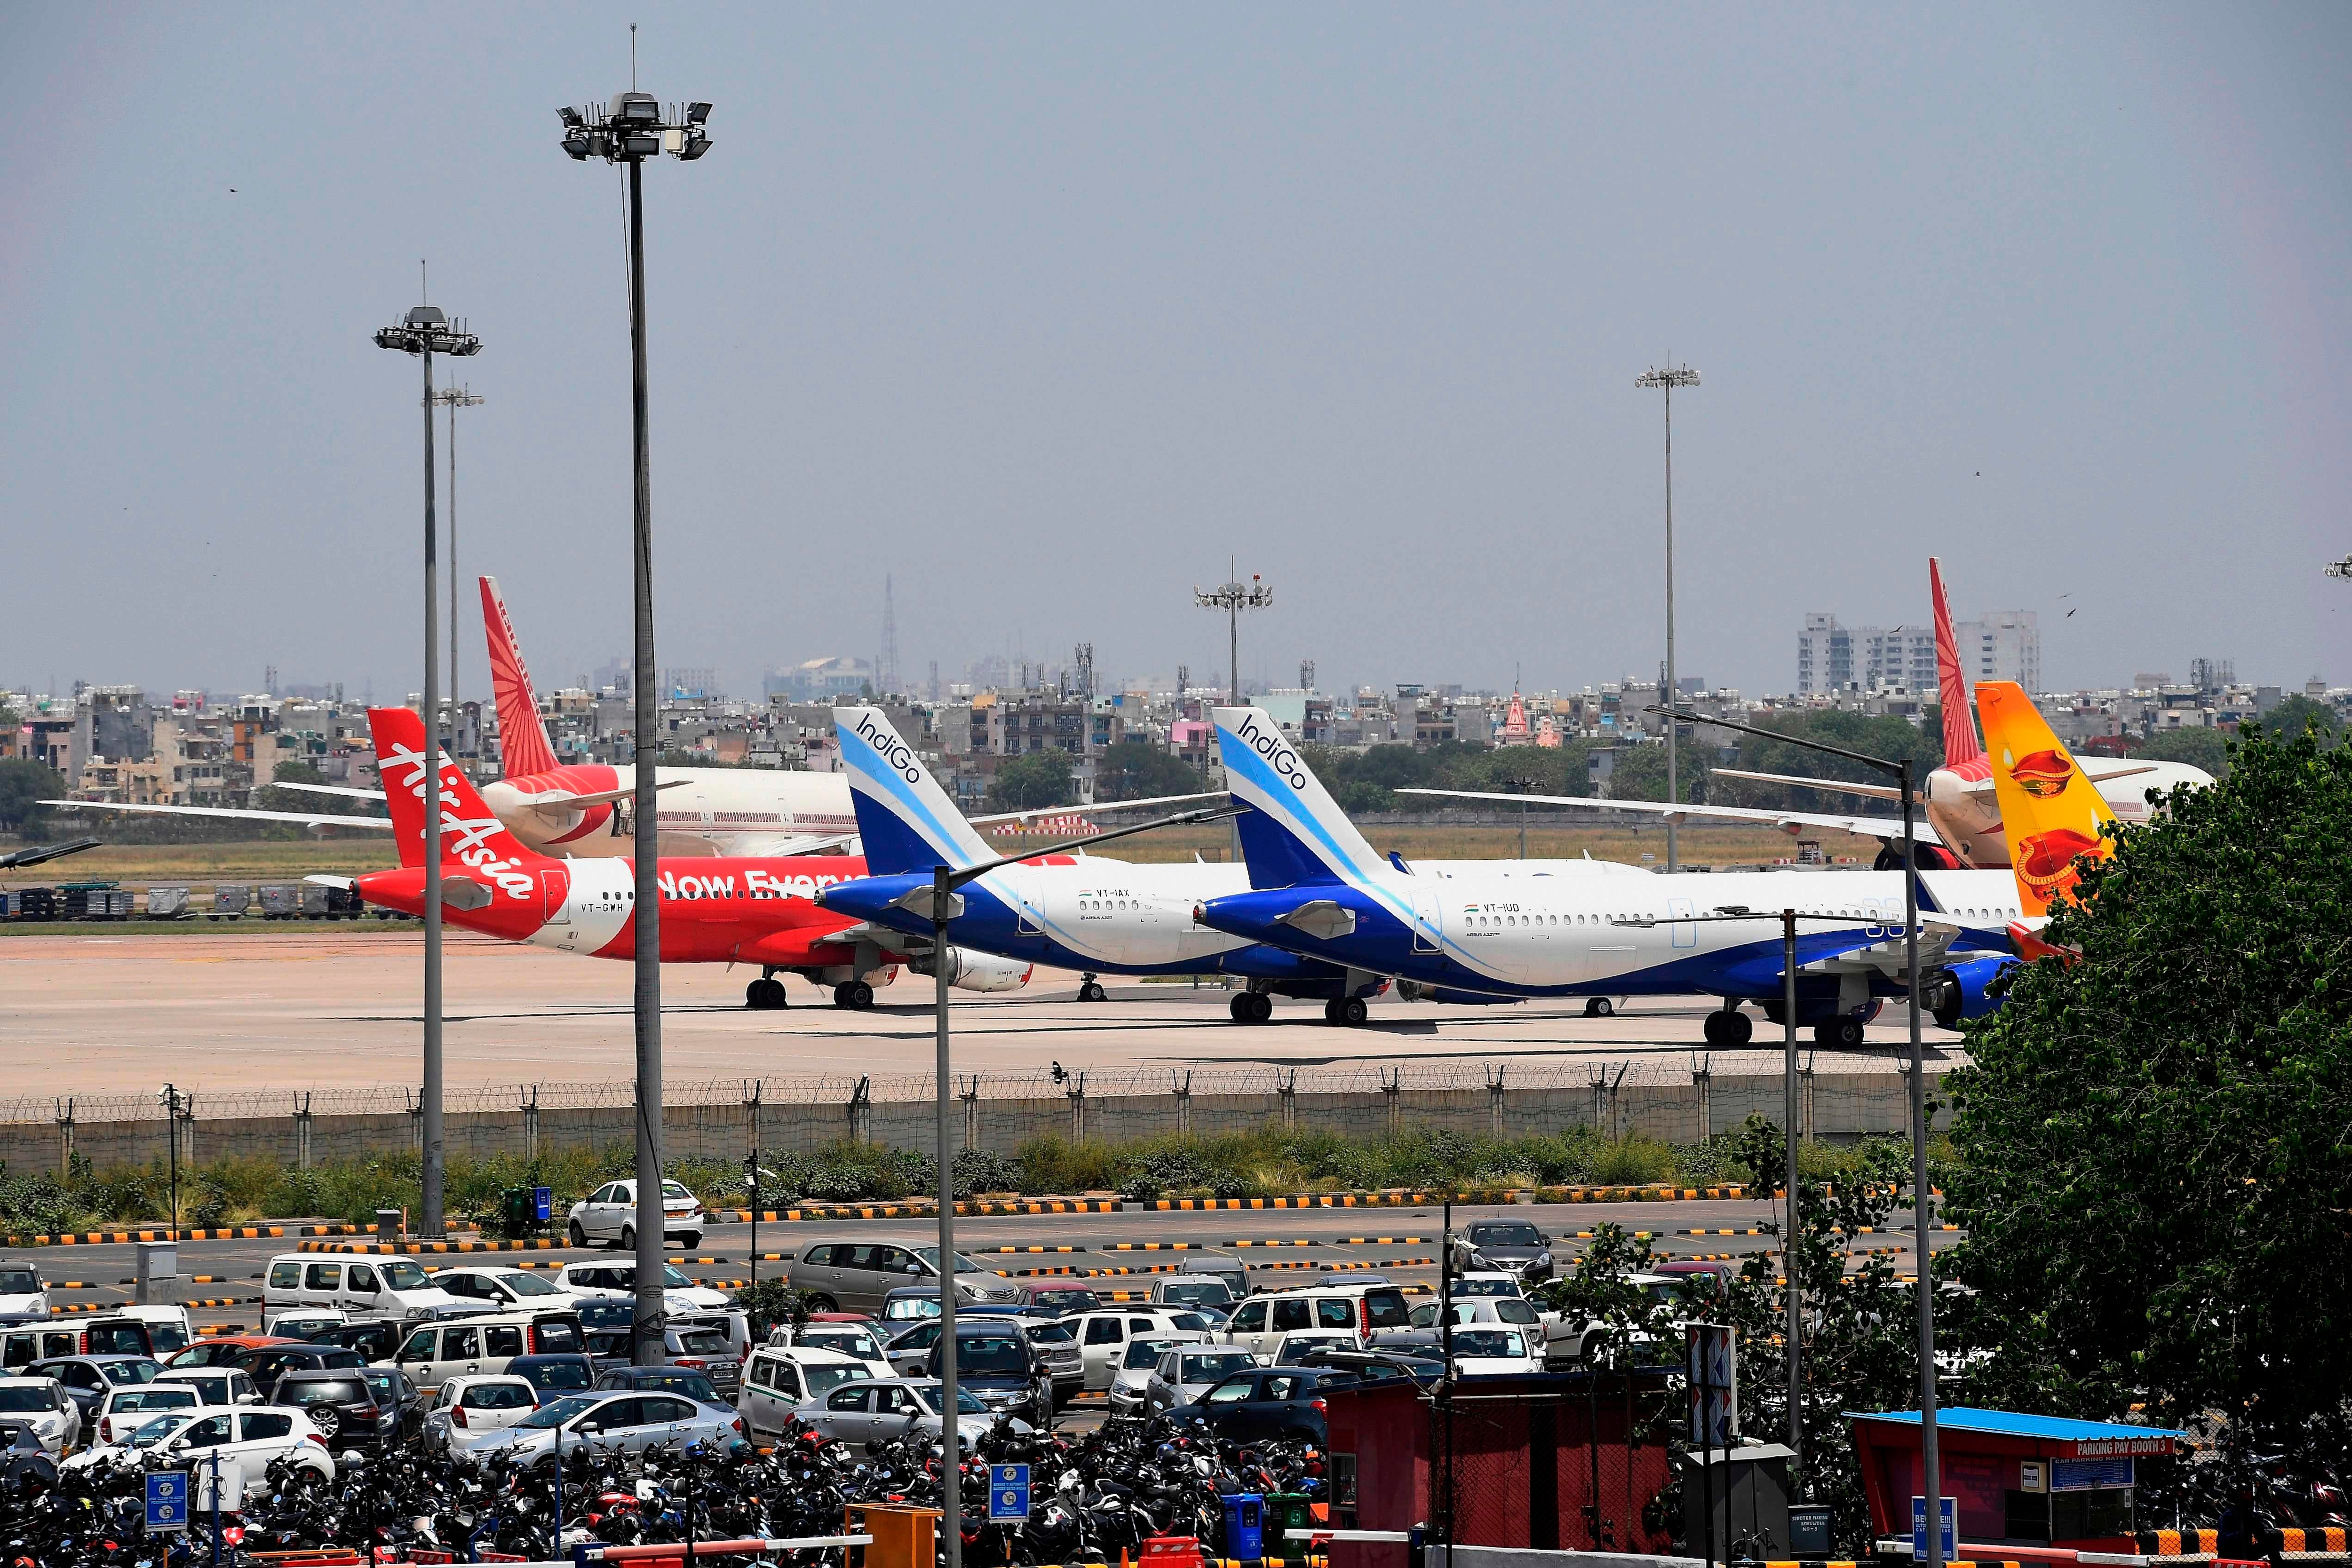 In this file photo taken on May 8, 2020 airplanes are seen at the Indira Gandhi International airport apron during a government-imposed nationwide lockdown.